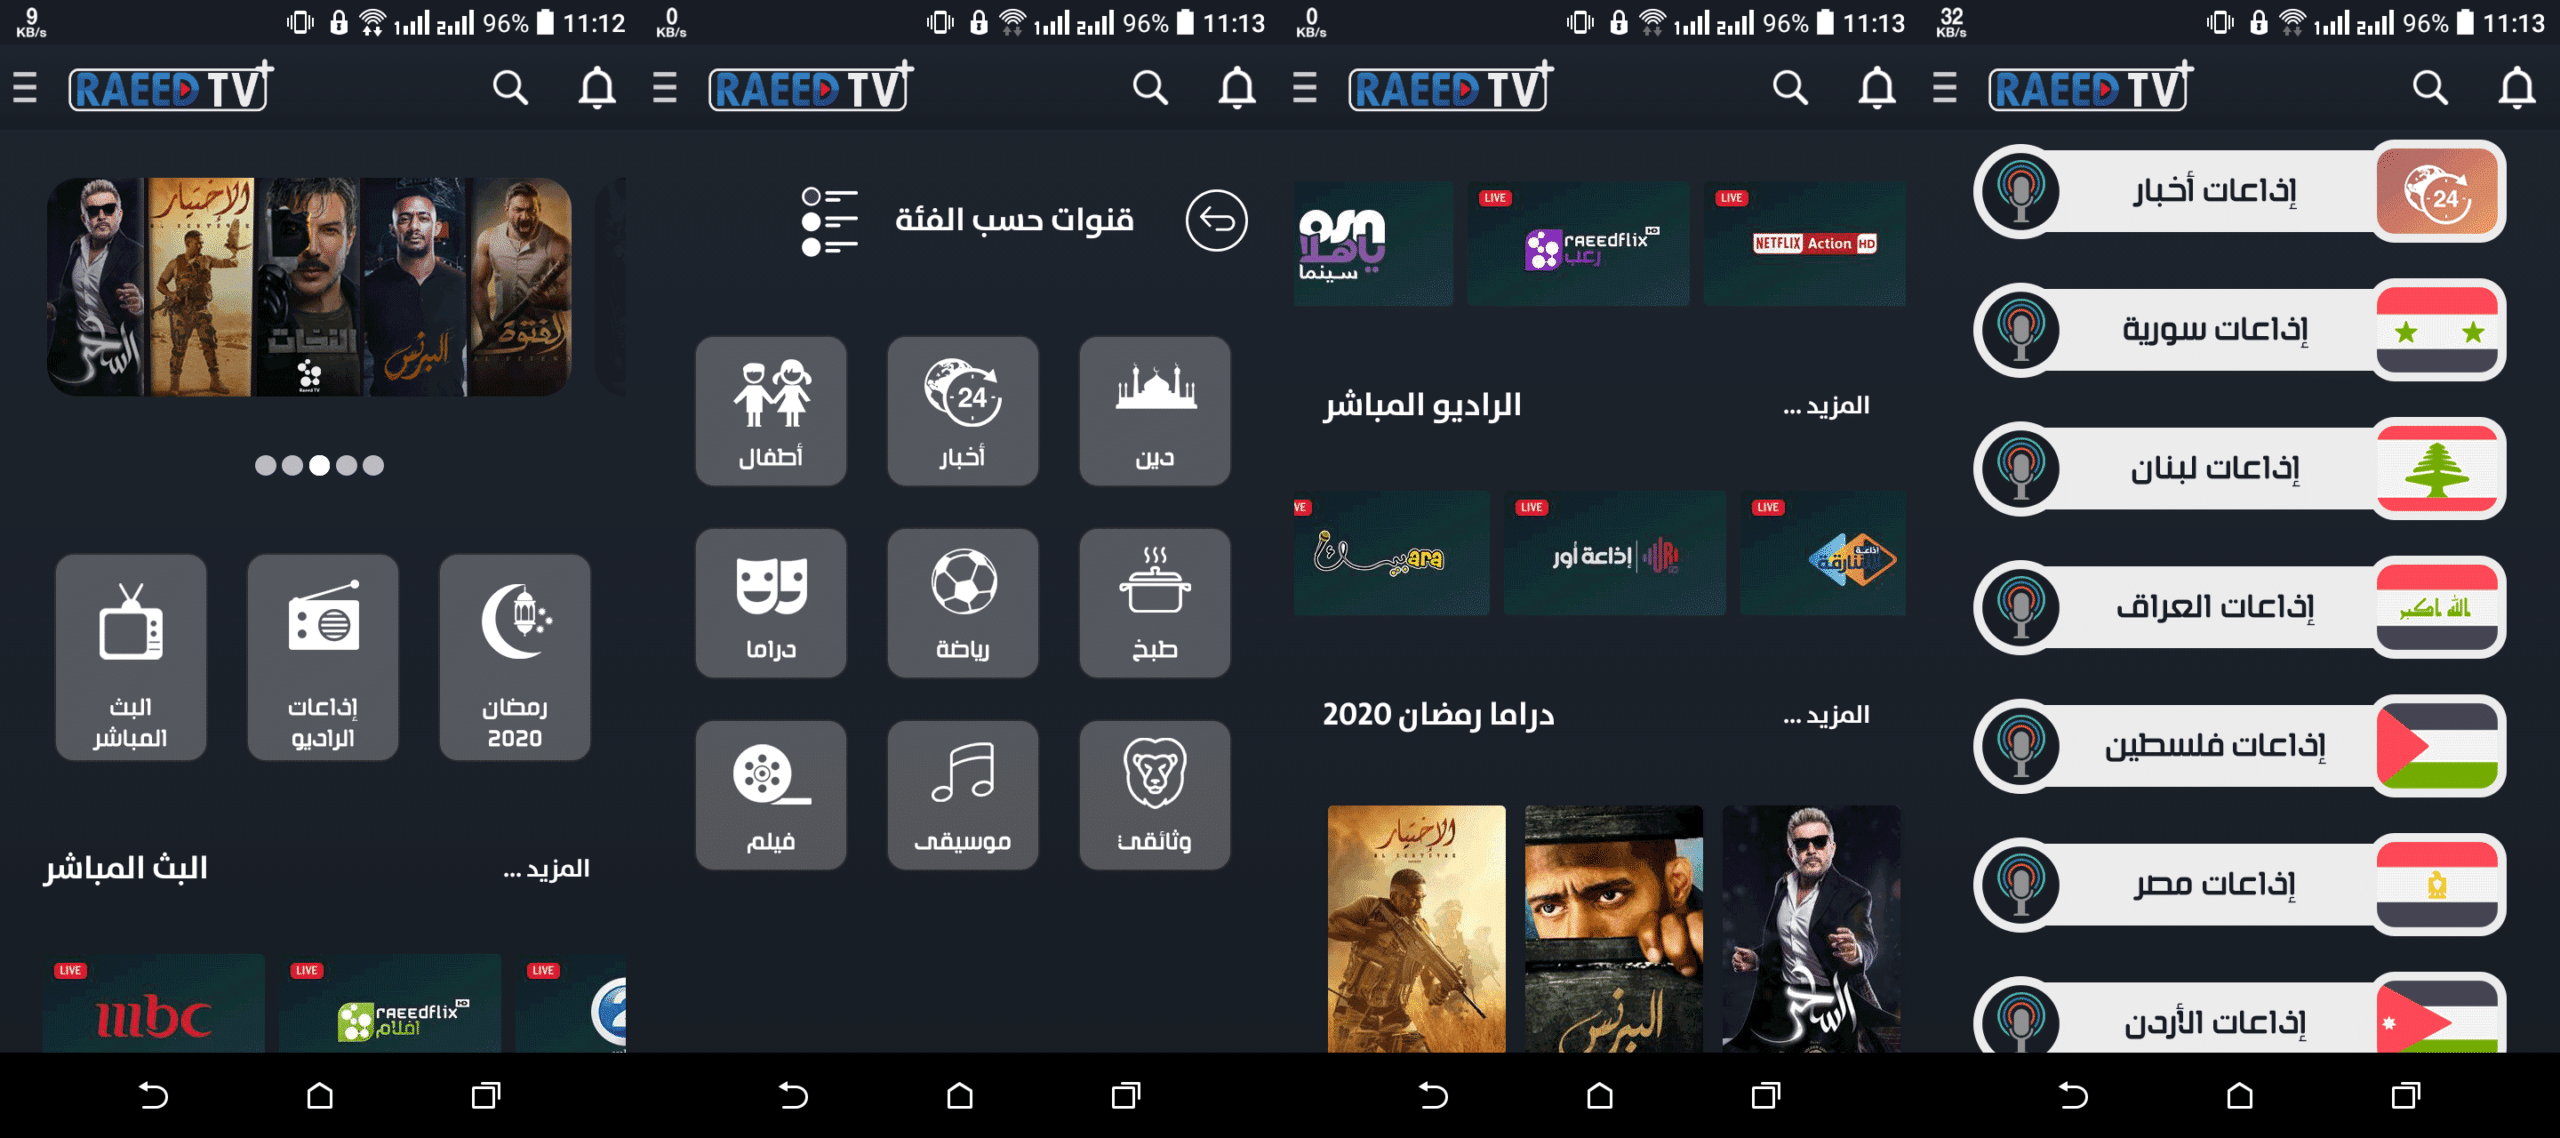 Raeed tv for Android Latest Apk 2